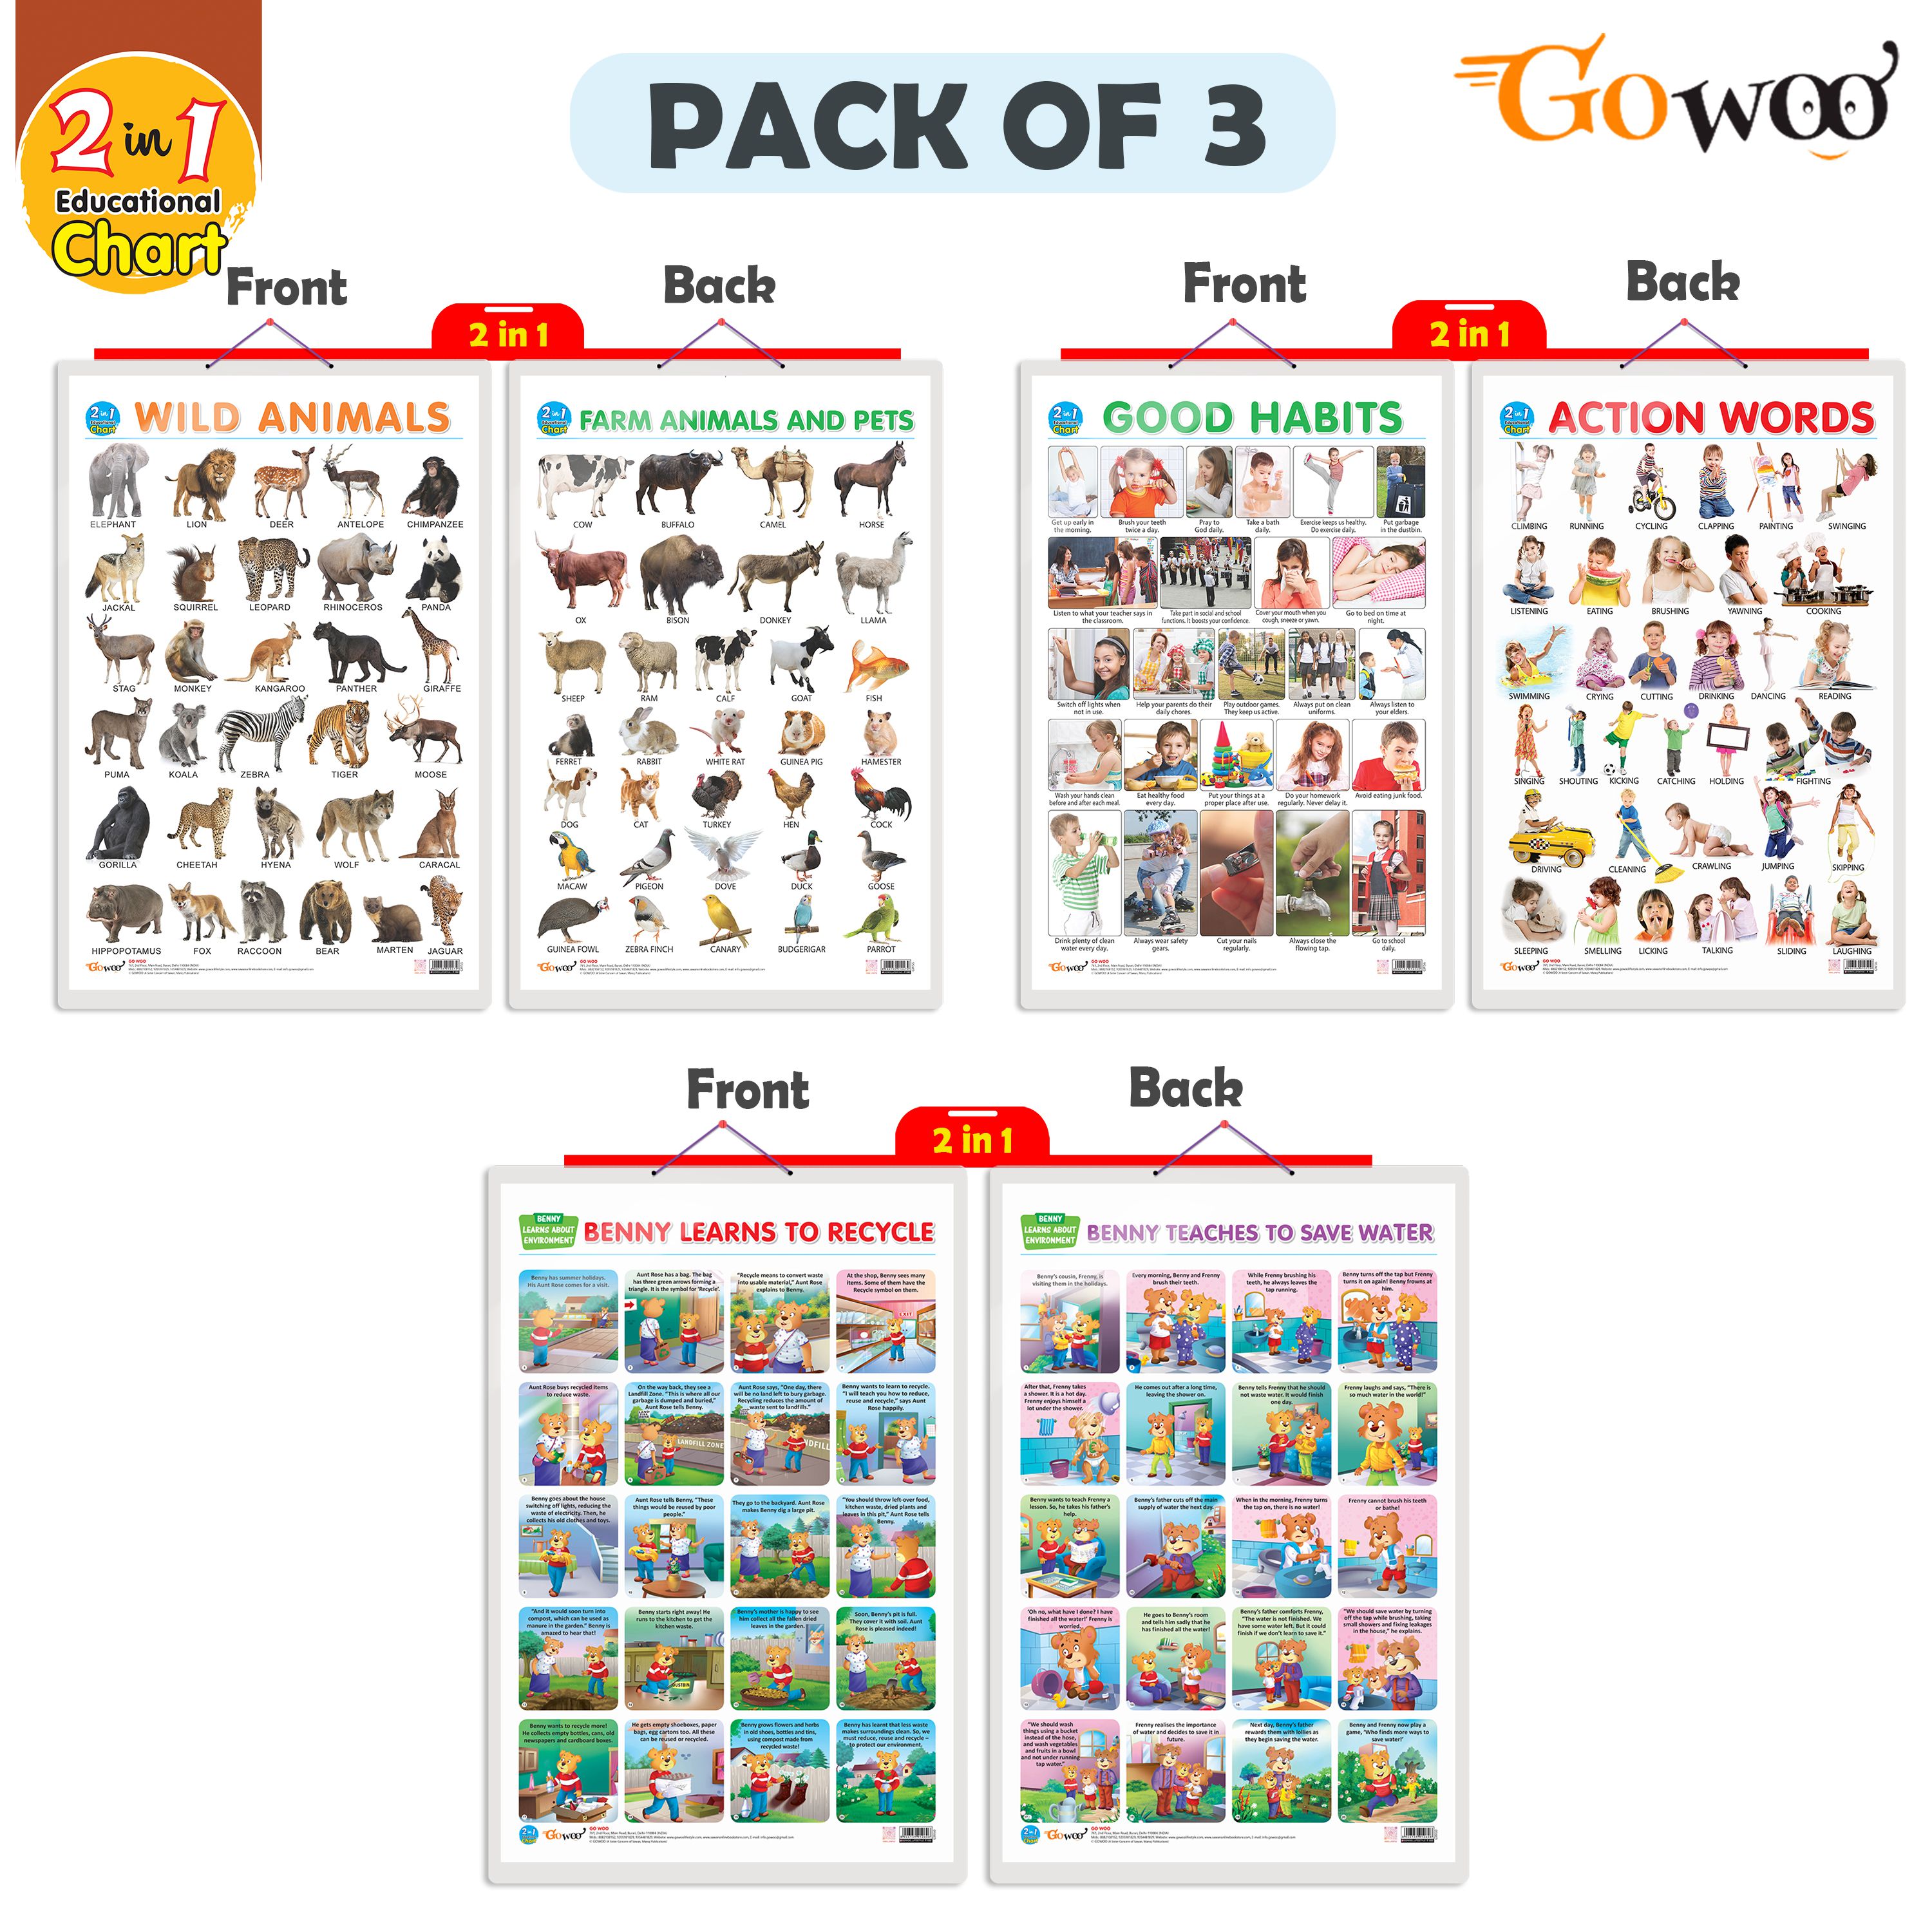     			Set of 3 |2 IN 1 WILD AND FARM ANIMALS & PETS, 2 IN 1 GOOD HABITS AND ACTION WORDS and 2 IN 1 BENNY LEARNS TO RECYCLE AND BENNY TEACHES TO SAVE WATER Early Learning Educational Charts for Kids